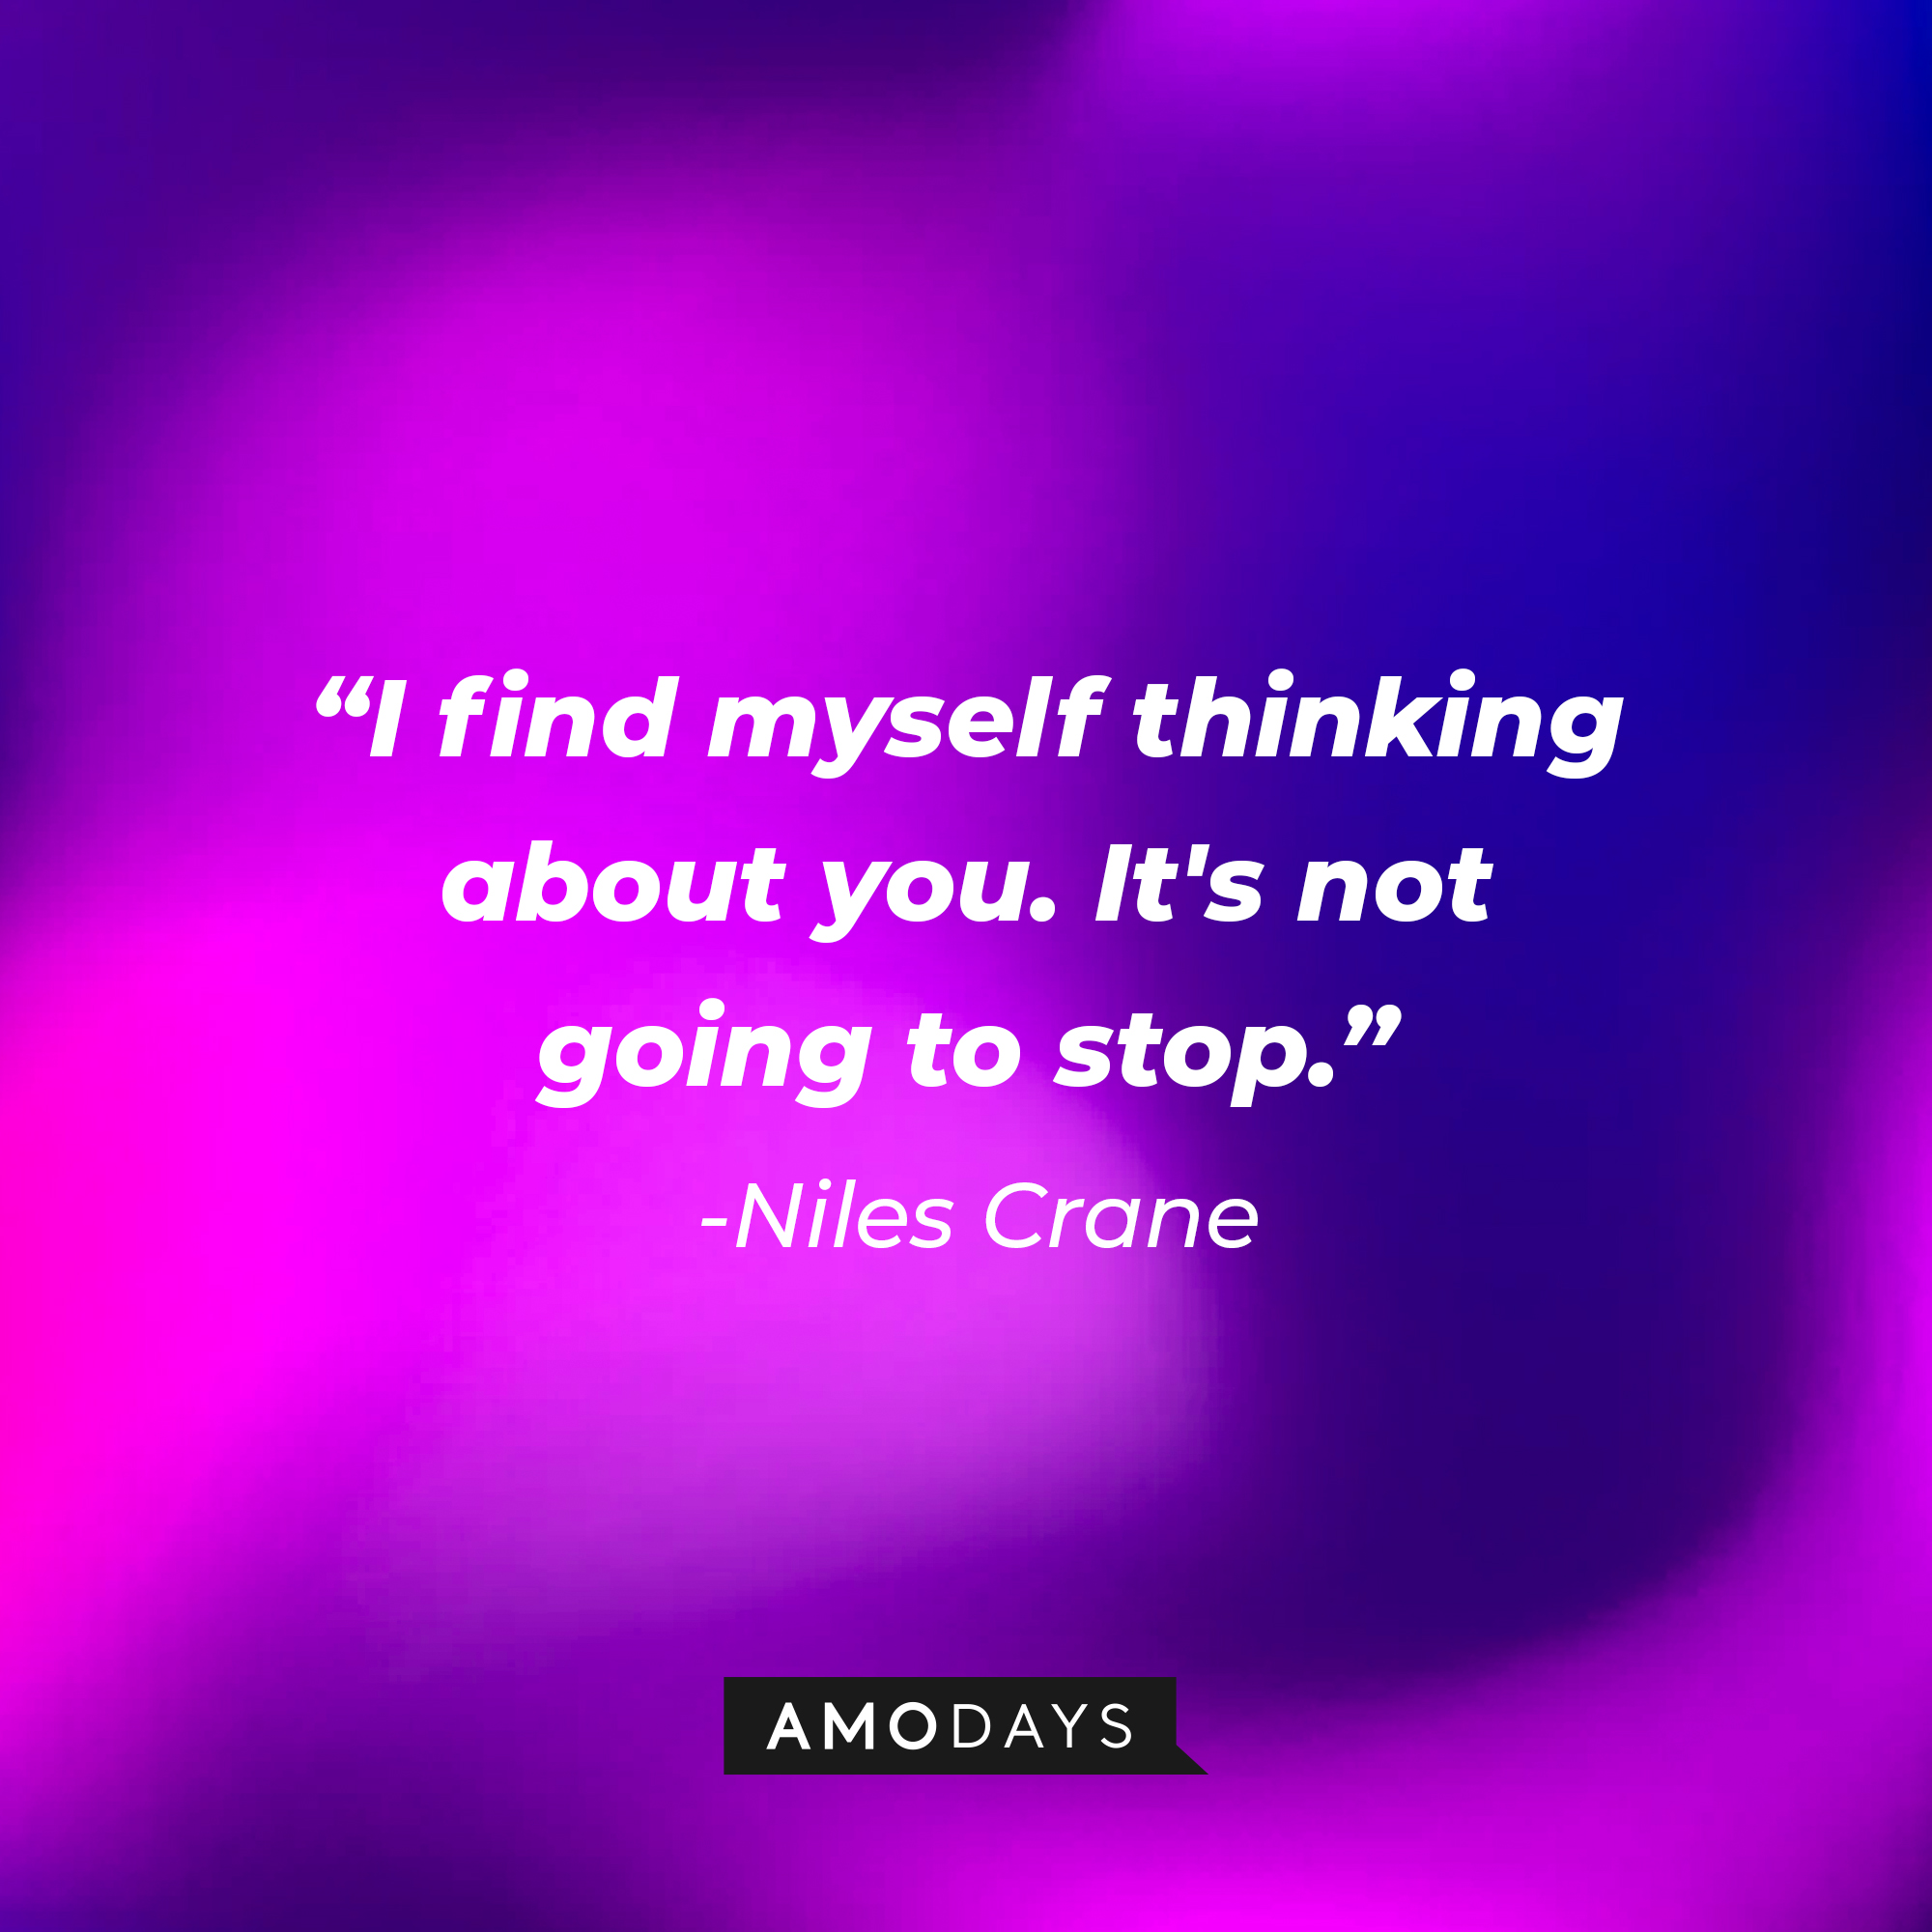 Niles Crane’s quote:  "I find myself thinking about you. It's not going to stop." | Source: AmoDays